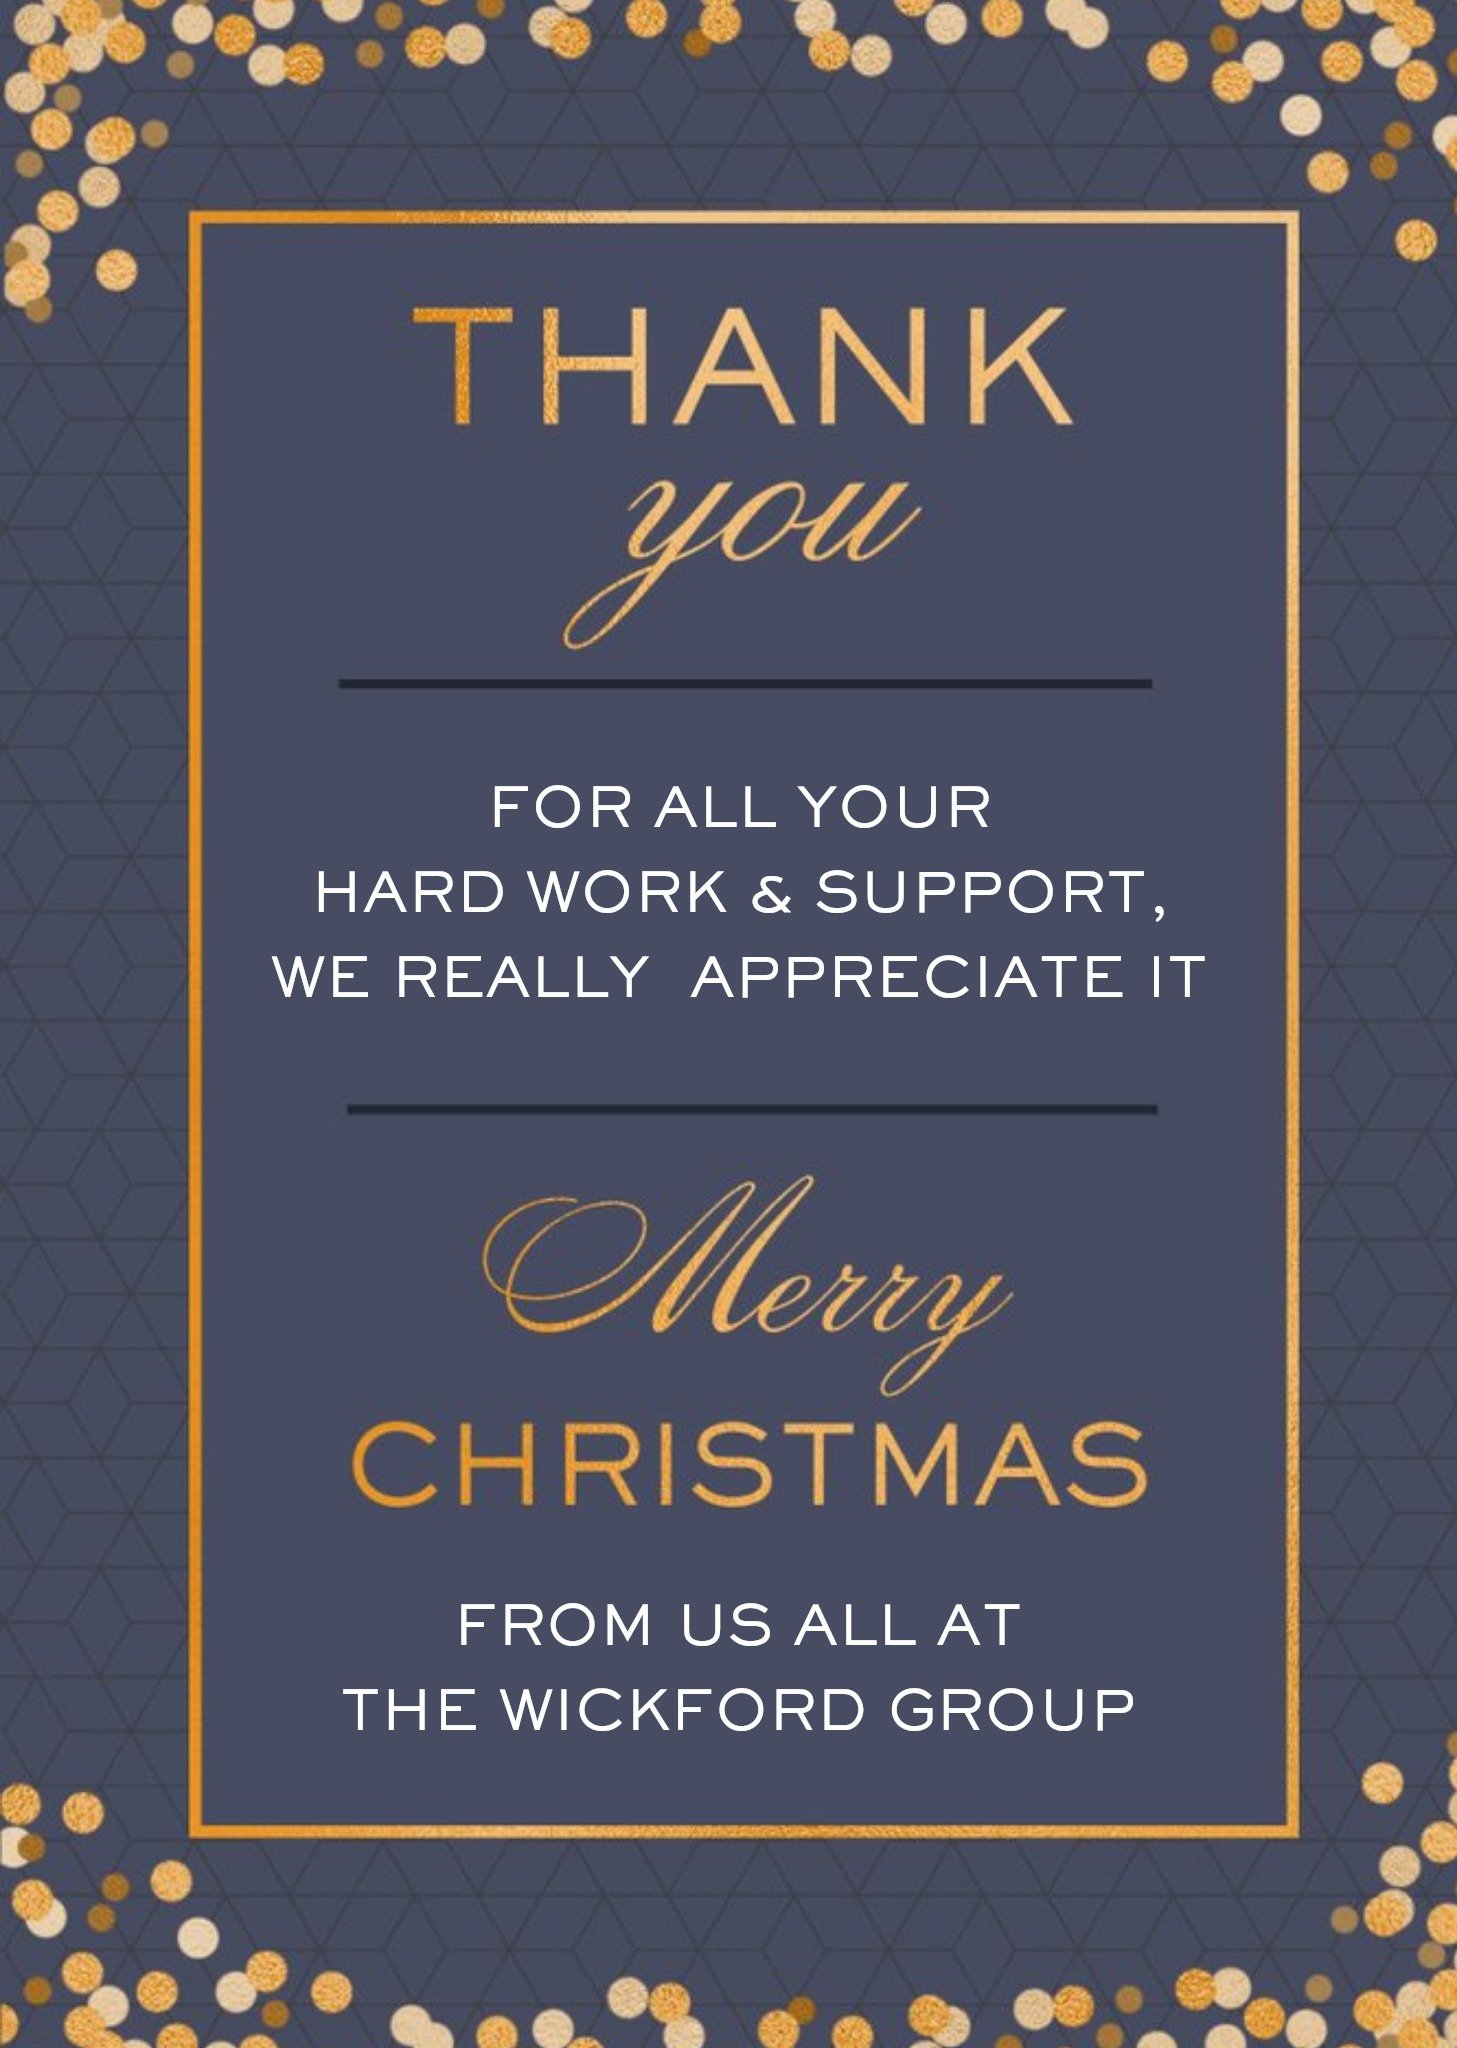 Moonpig Geometric Pattern Foil Corporate Christmas Thank You Card, Large